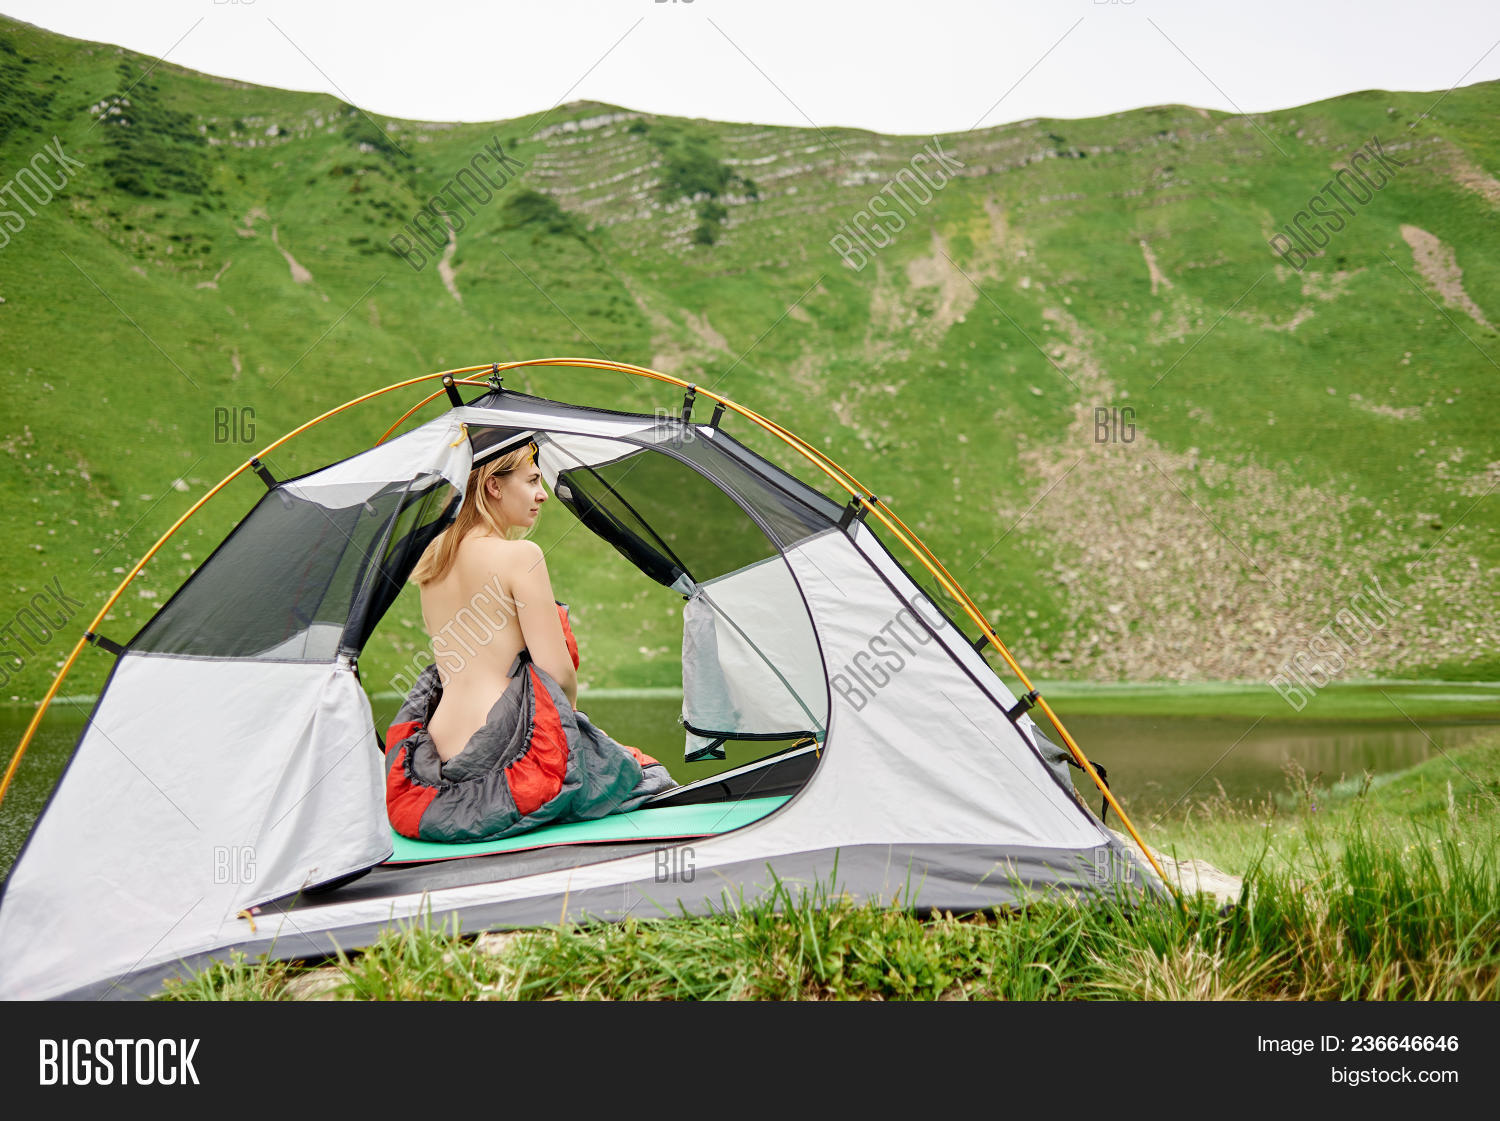 ari mulyana recommends naked women camping pic